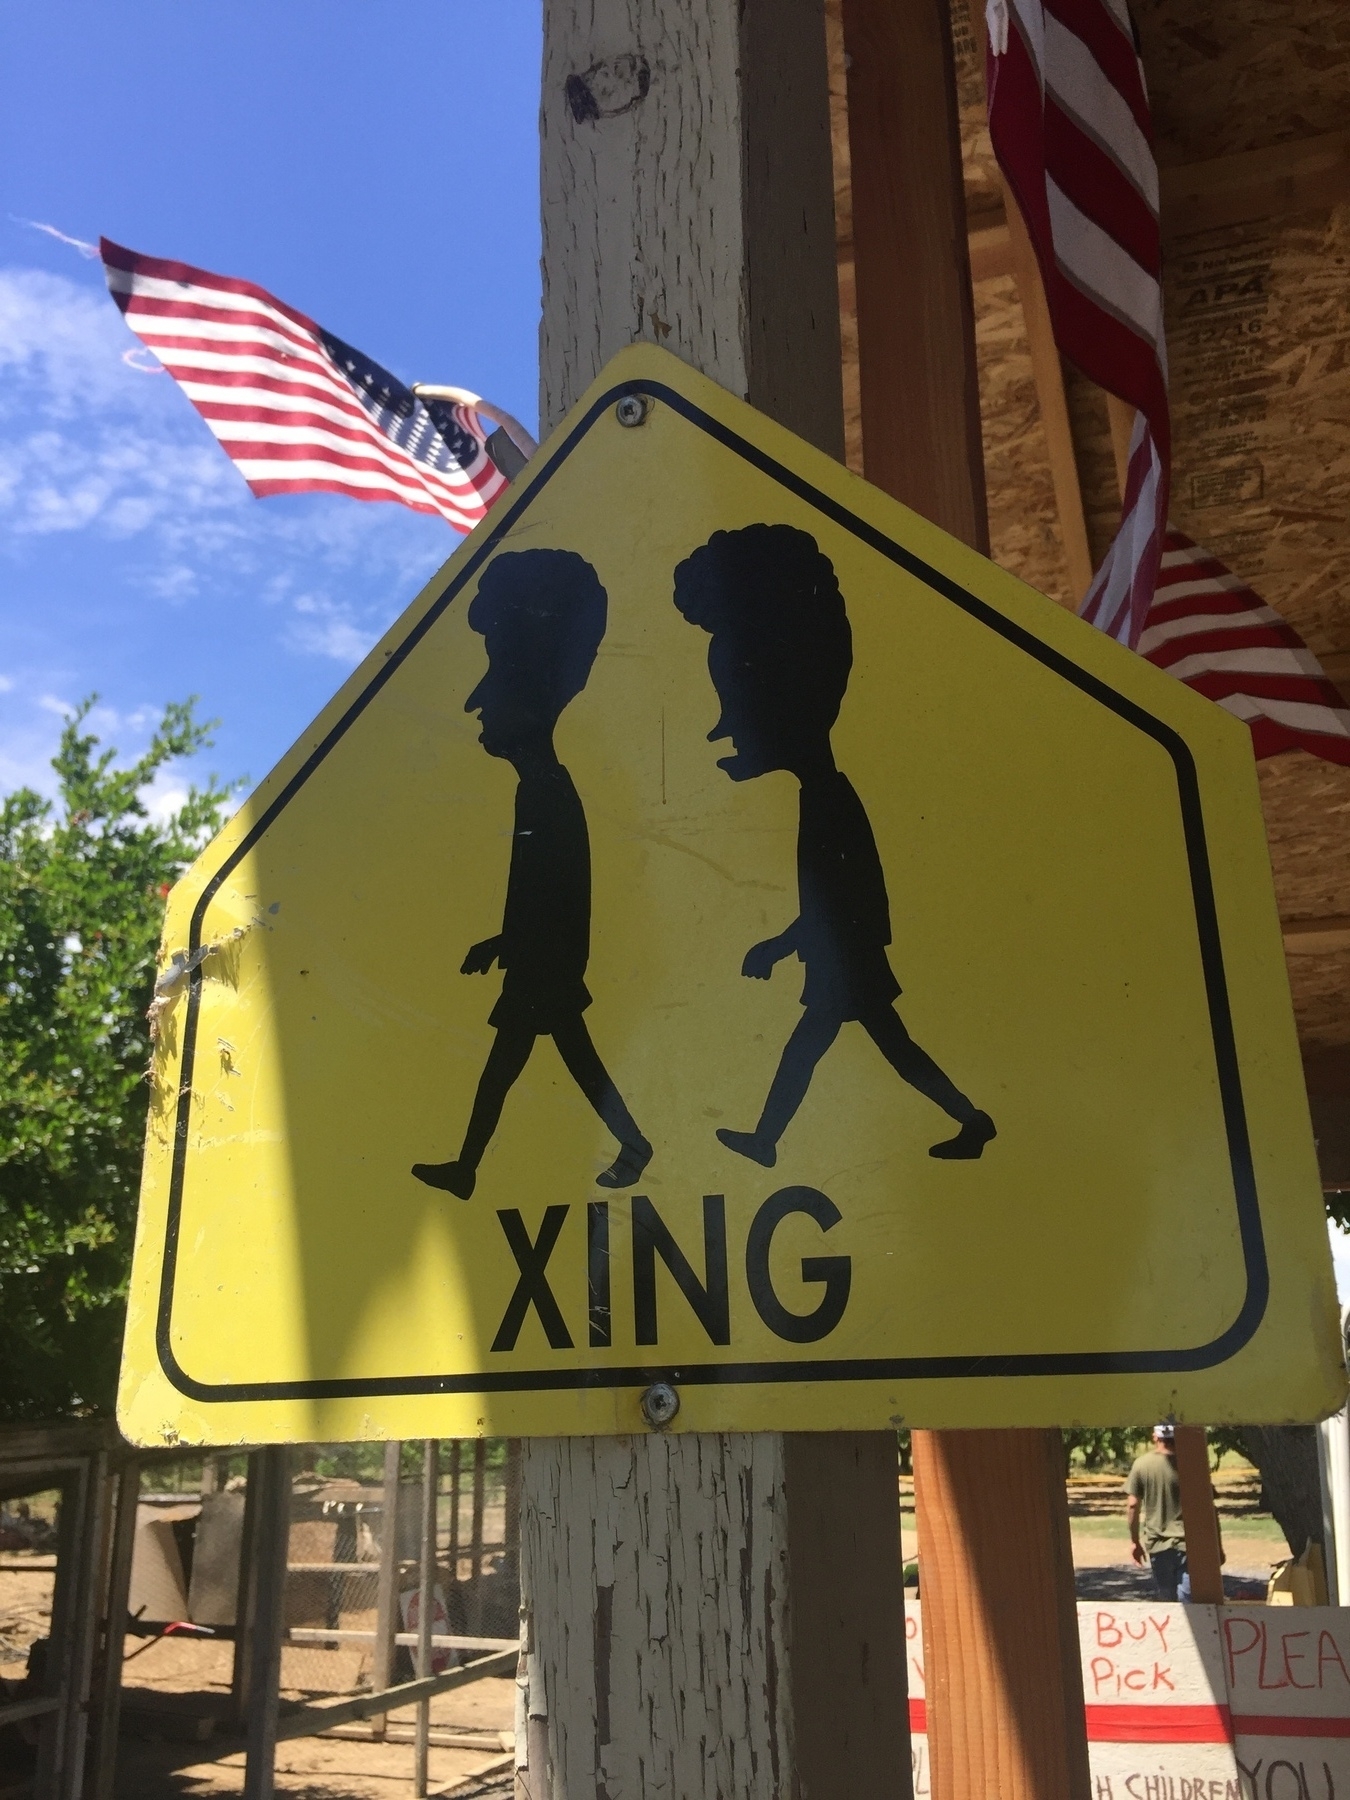 A street sign with the word xing and a silhouette of beavis and butthead  